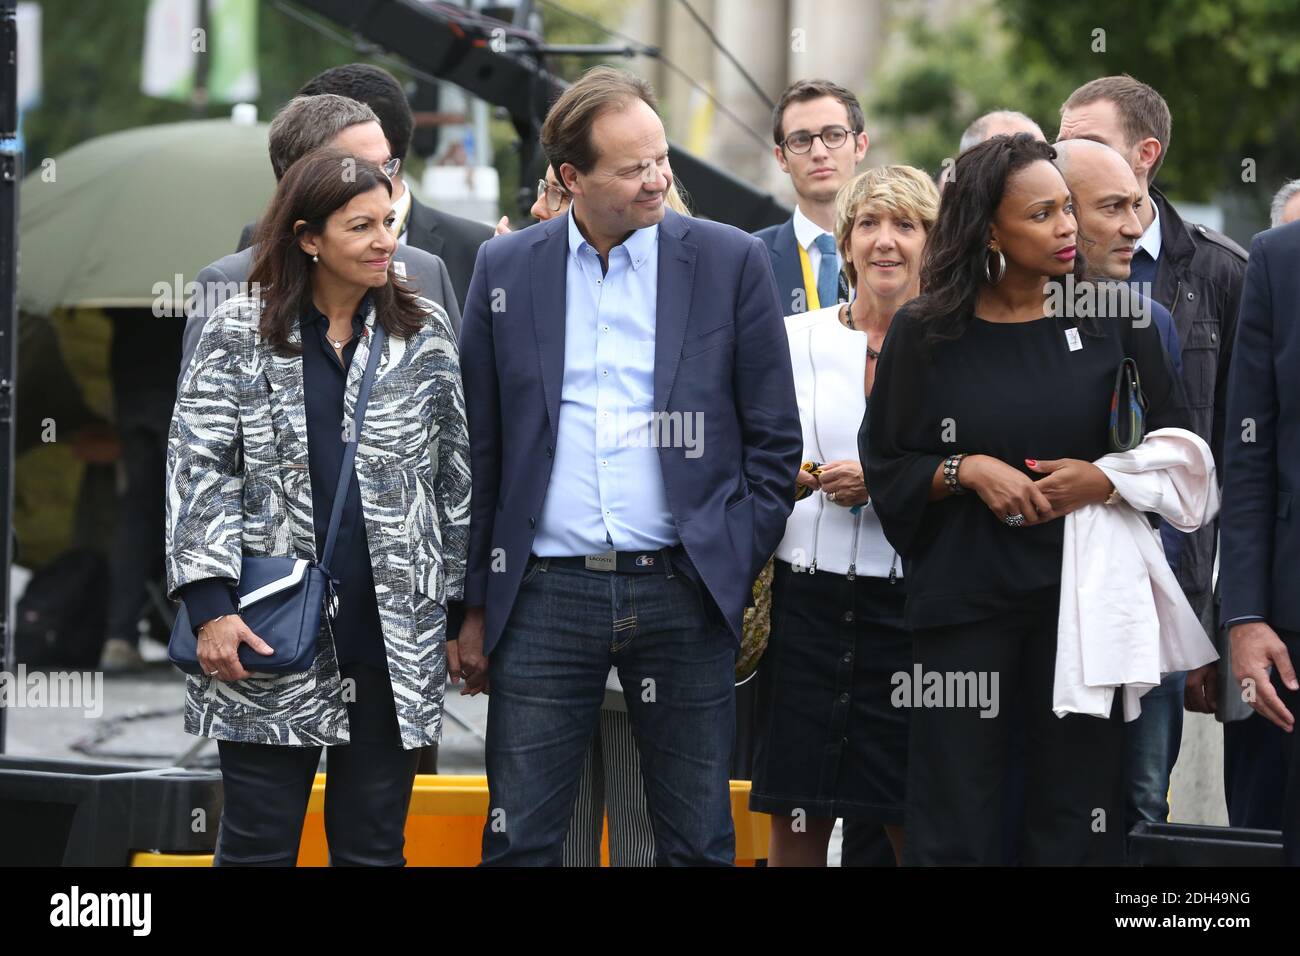 Mayor of Paris Anne Hidalgo and her Husband Jean-Marc Germain, Laura  Flessel-Colovic during stage 21 of the 2017 Tour de France in Paris in  Paris, France, July 23, 2016. Photo by Jerome